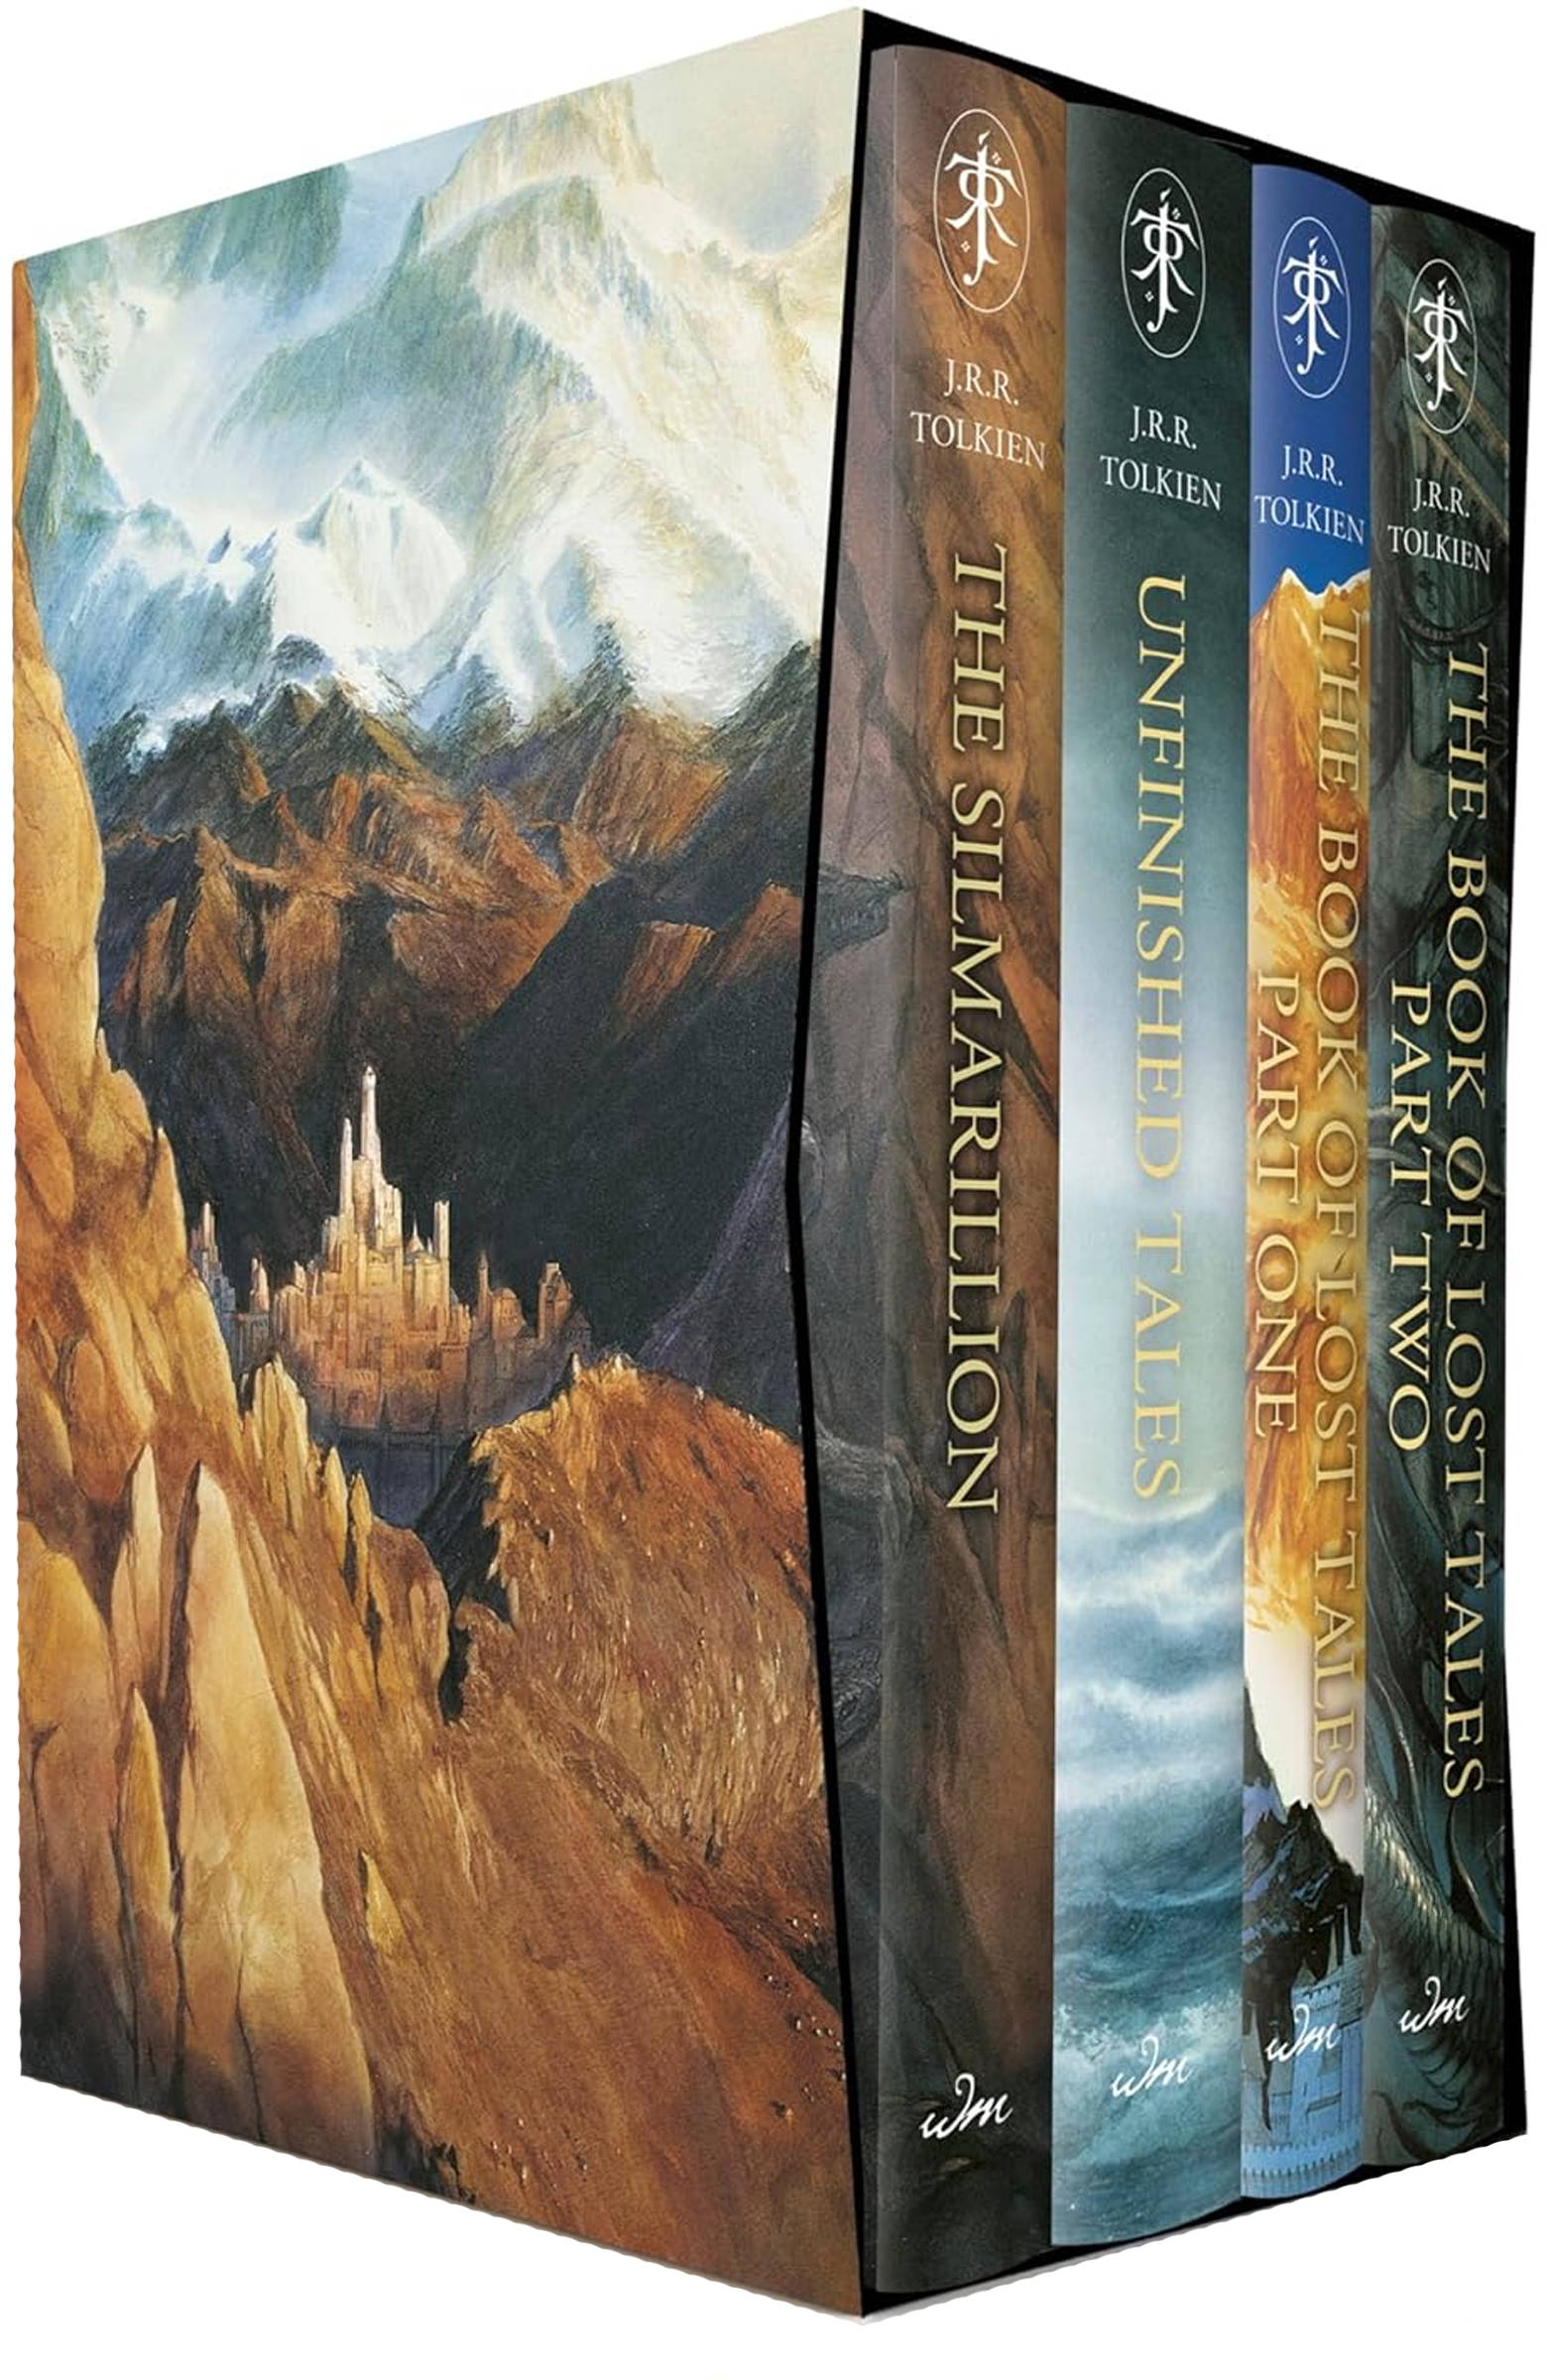  The History of Middle-earth Box Set #1